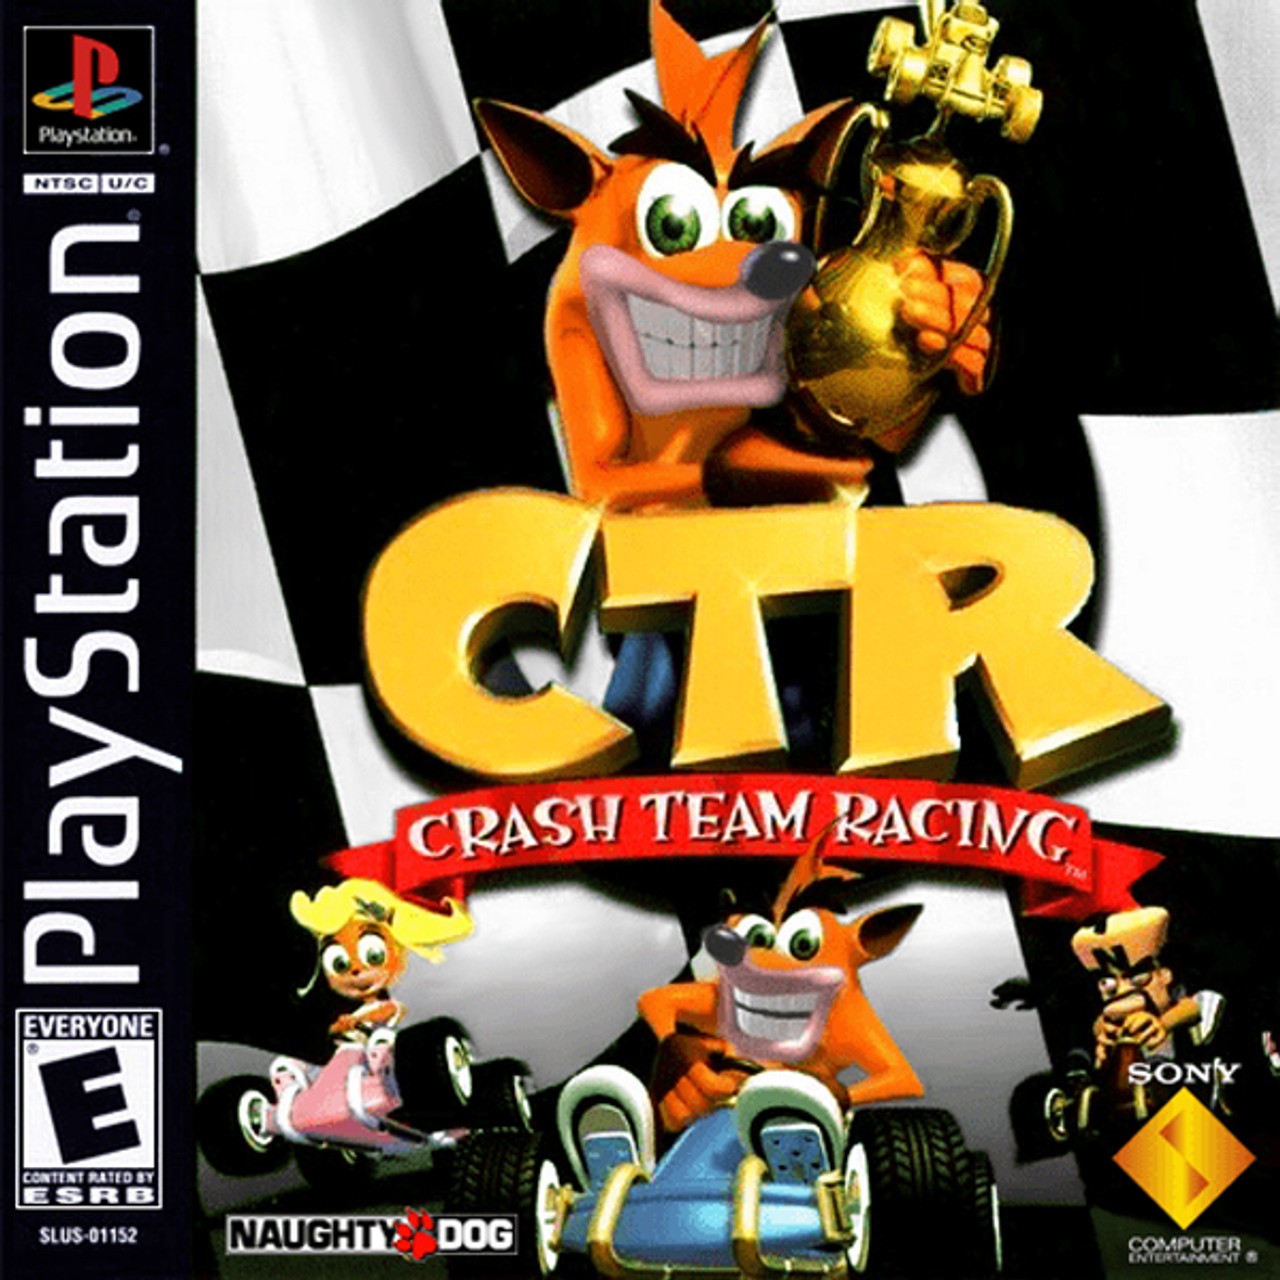 ctr-crash-team-racing-playstation-1-ps1-game-for-sale-dkoldies